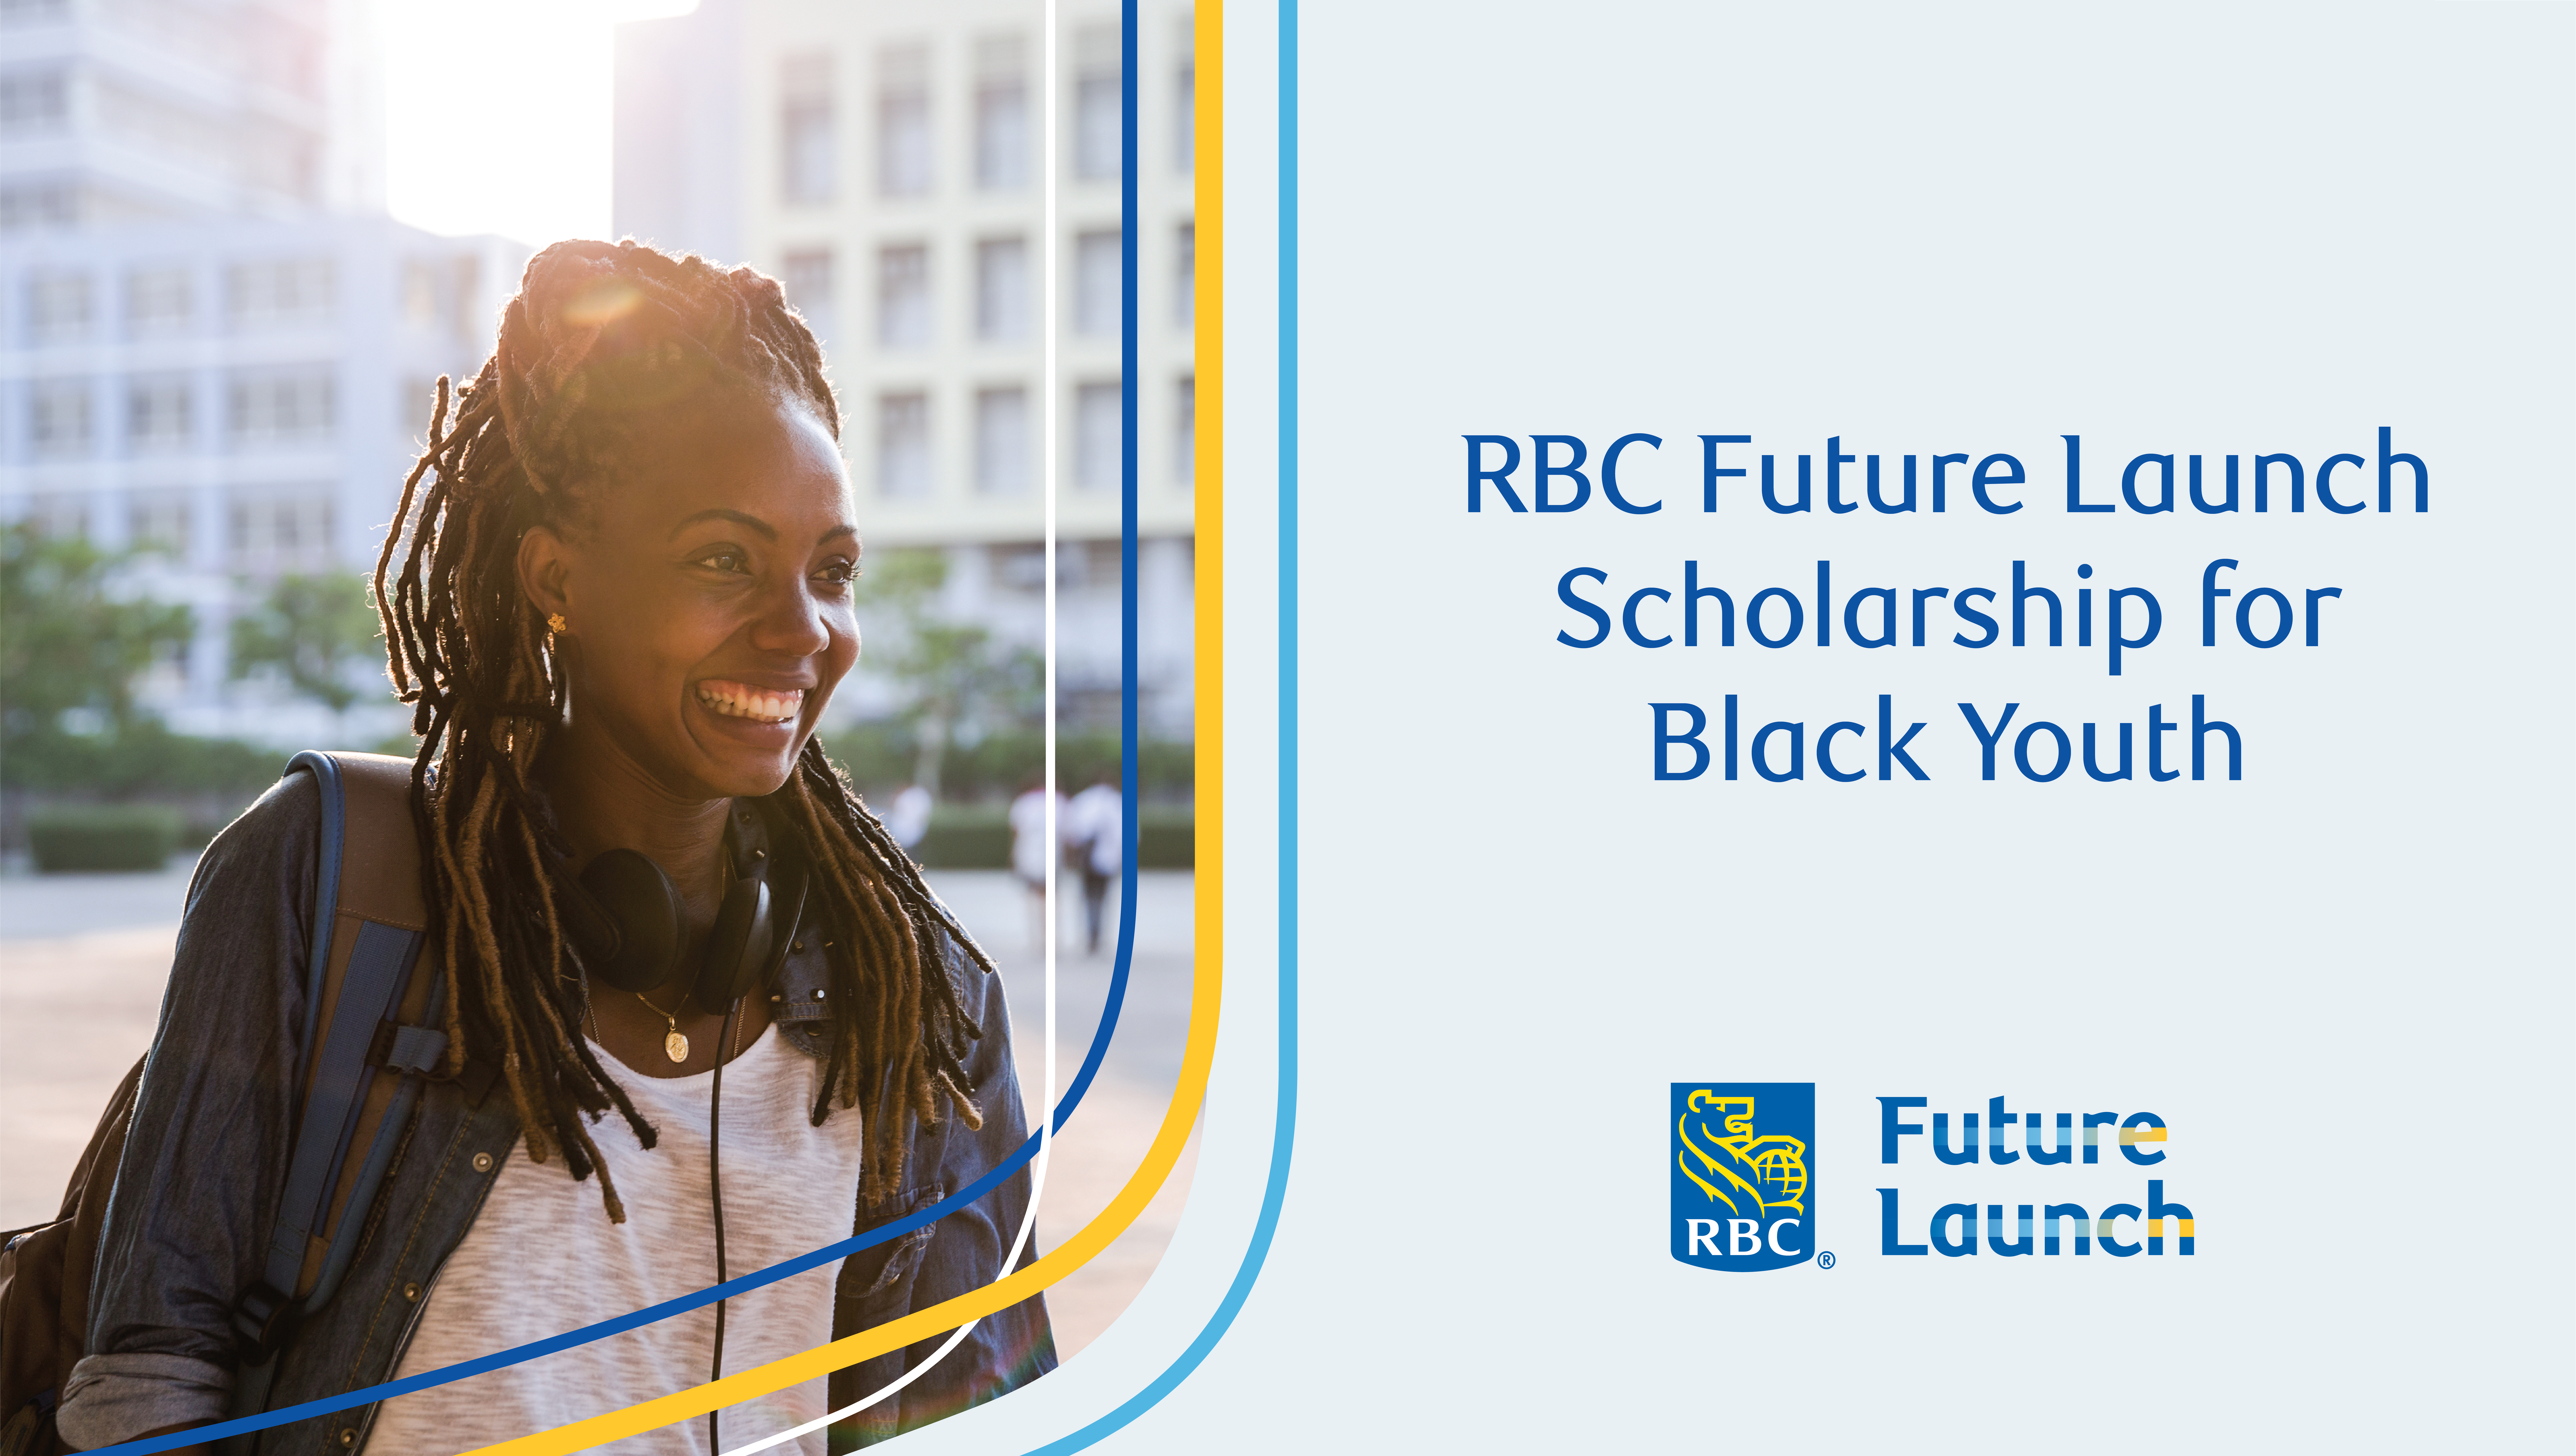 RBC Future Launch Scholarship for Black Youth